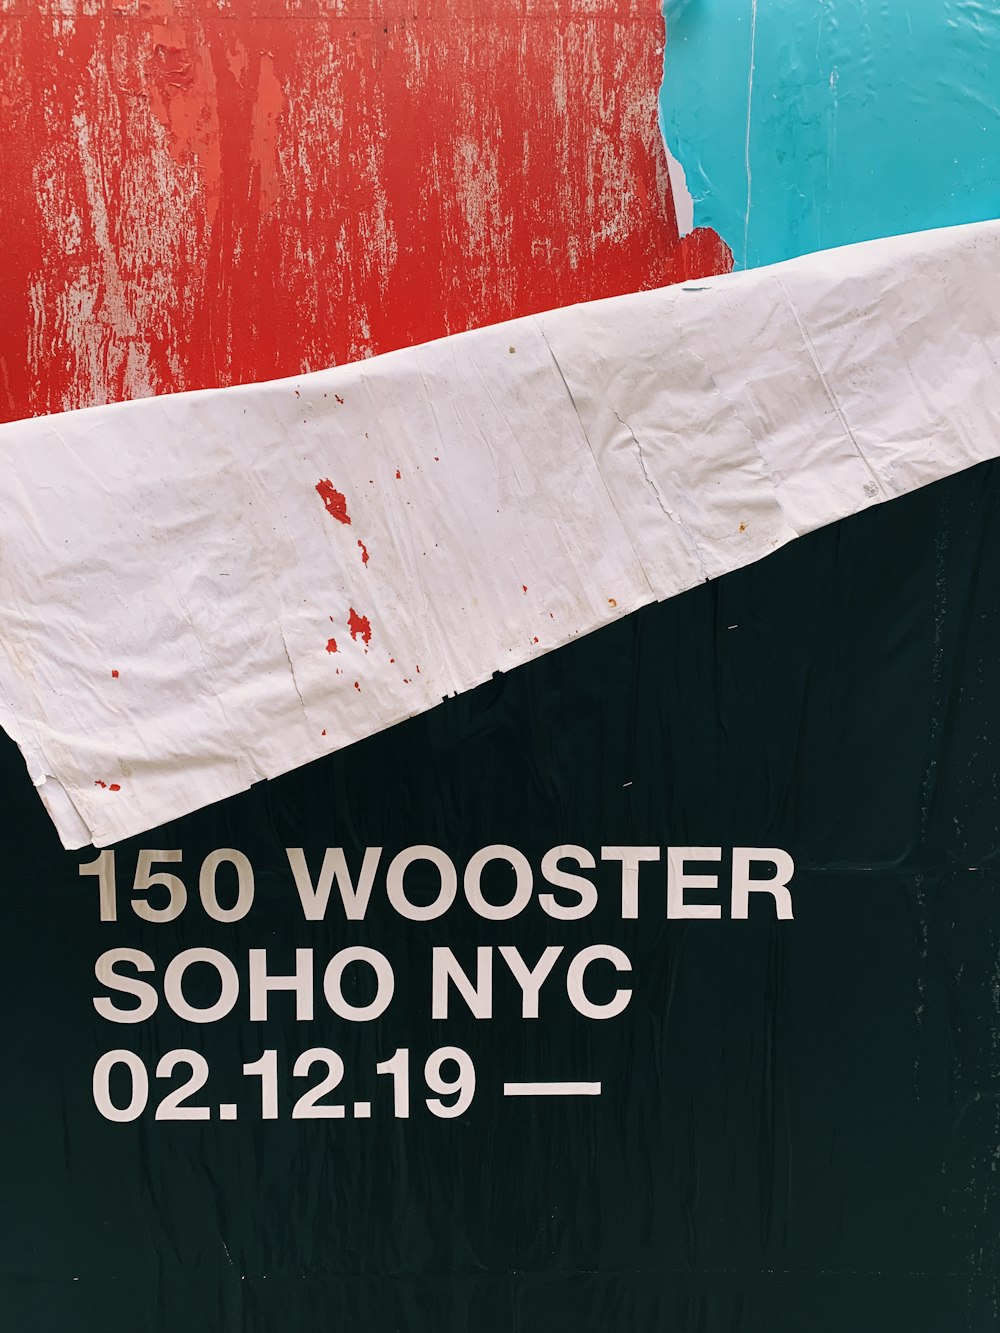 150 Wooster Soho NYC texte